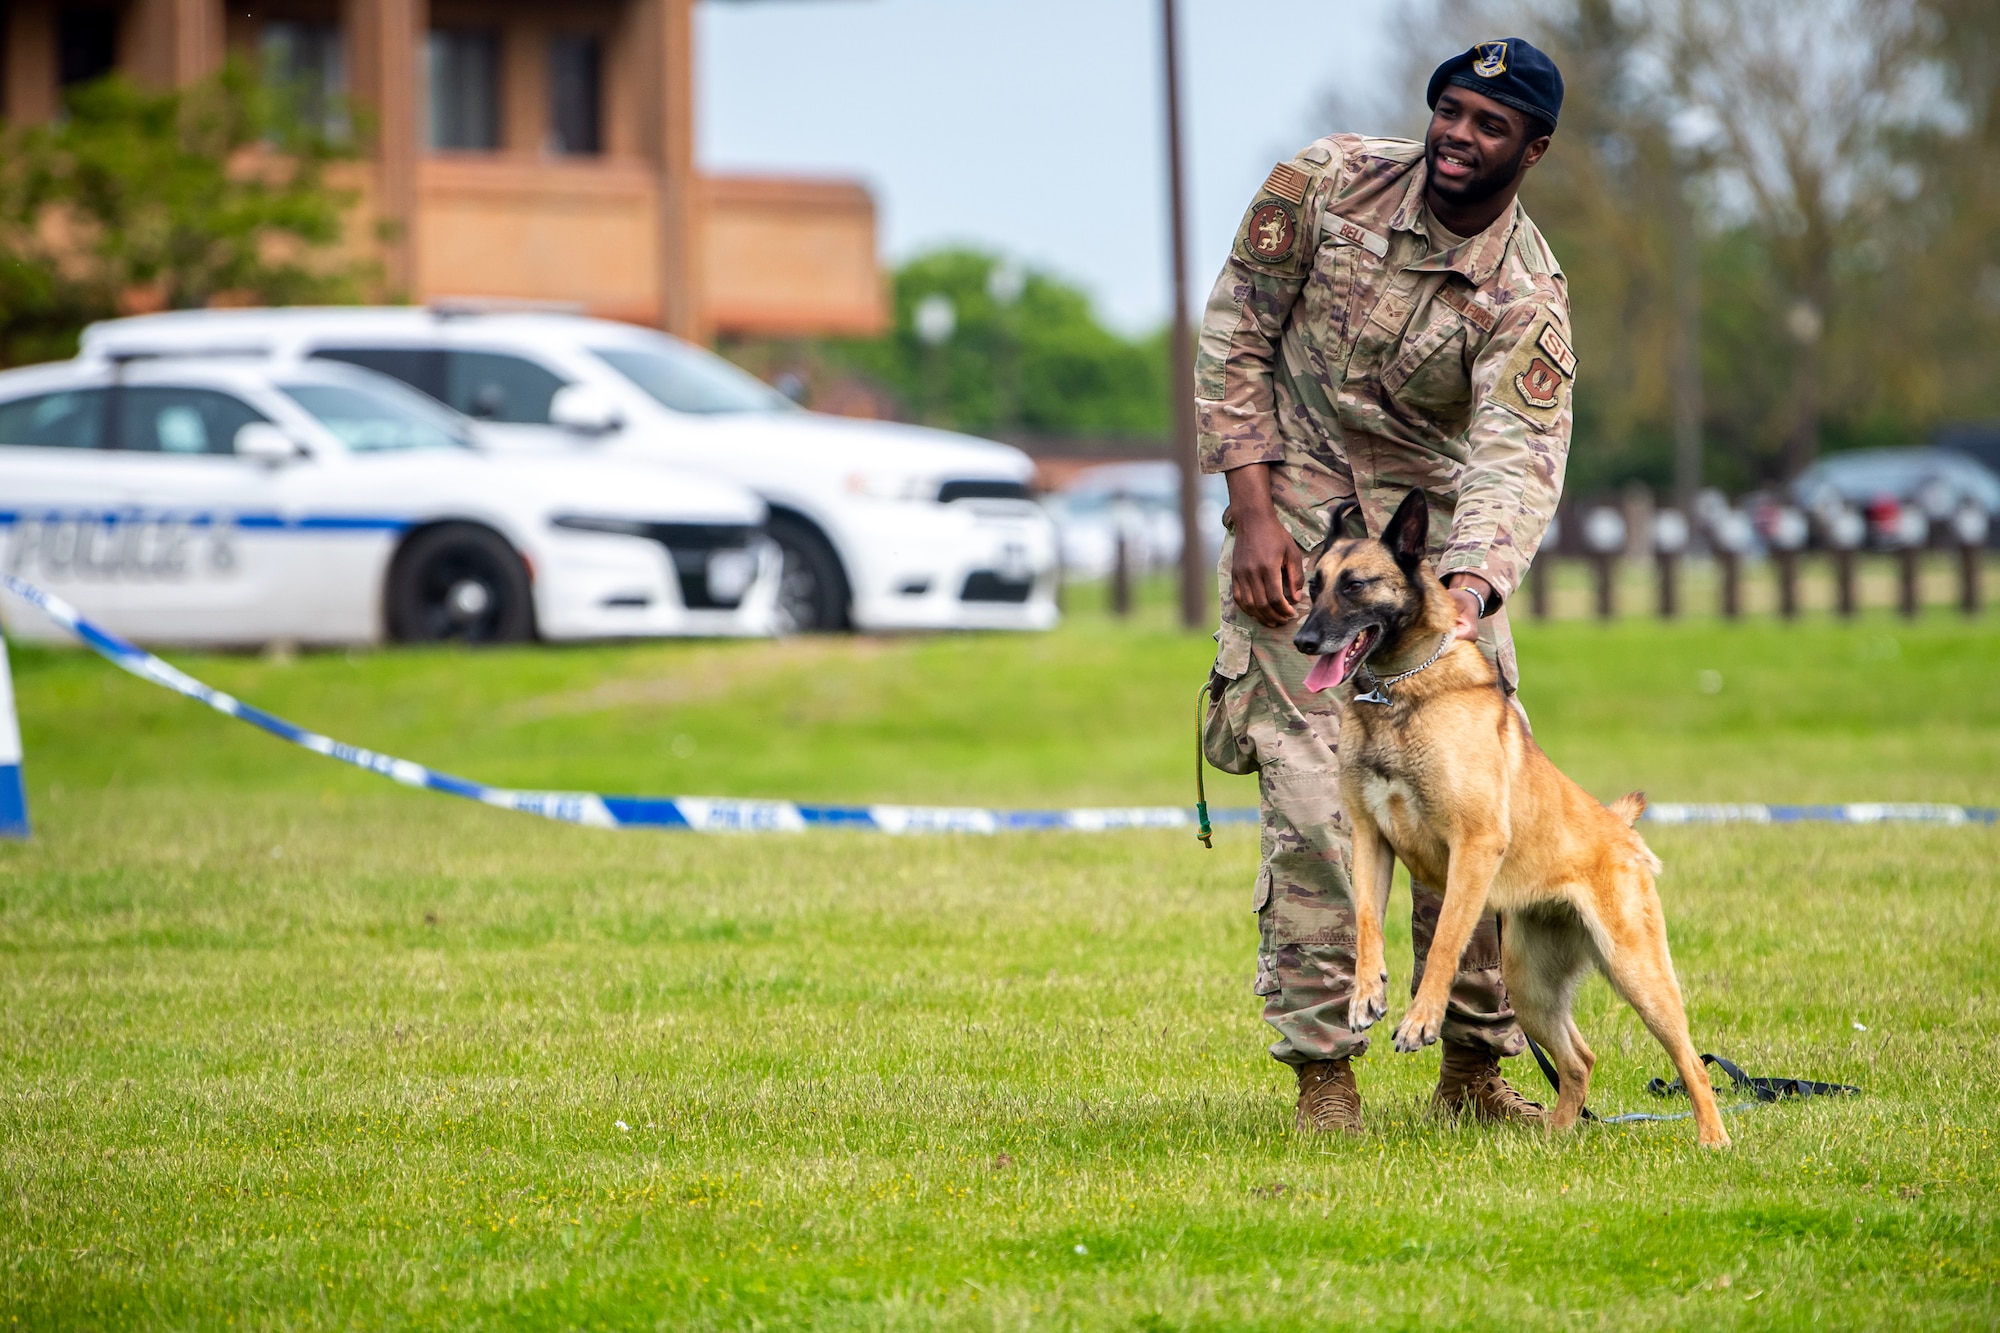 U.S. Air Force Senior Airman Jelani Bell, 100th Security Forces Squadron Military Working Dog handler, holds MWD Uta, during a demonstration at RAF Alconbury, England, May 18, 2023. The demonstration was a part of National Police Week where members from SFS engaged with and demonstrated police capabilities to students from Alconbury Elementary school. (U.S. Air Force photo by Staff Sgt. Eugene Oliver)